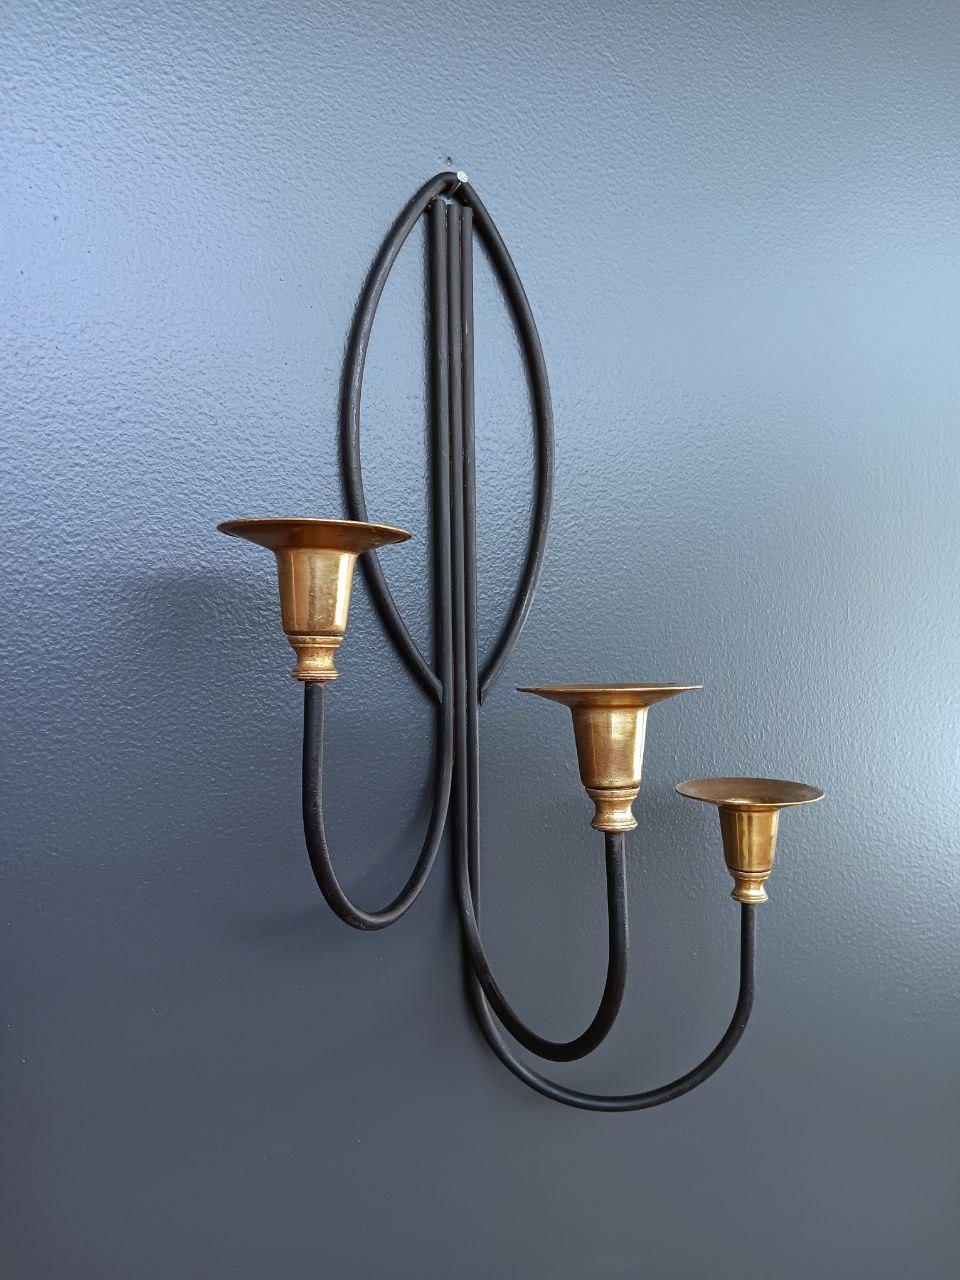 Mid-20th Century Pair of Mid-Century Modern Iron & Brass Candle Wall Sconces For Sale